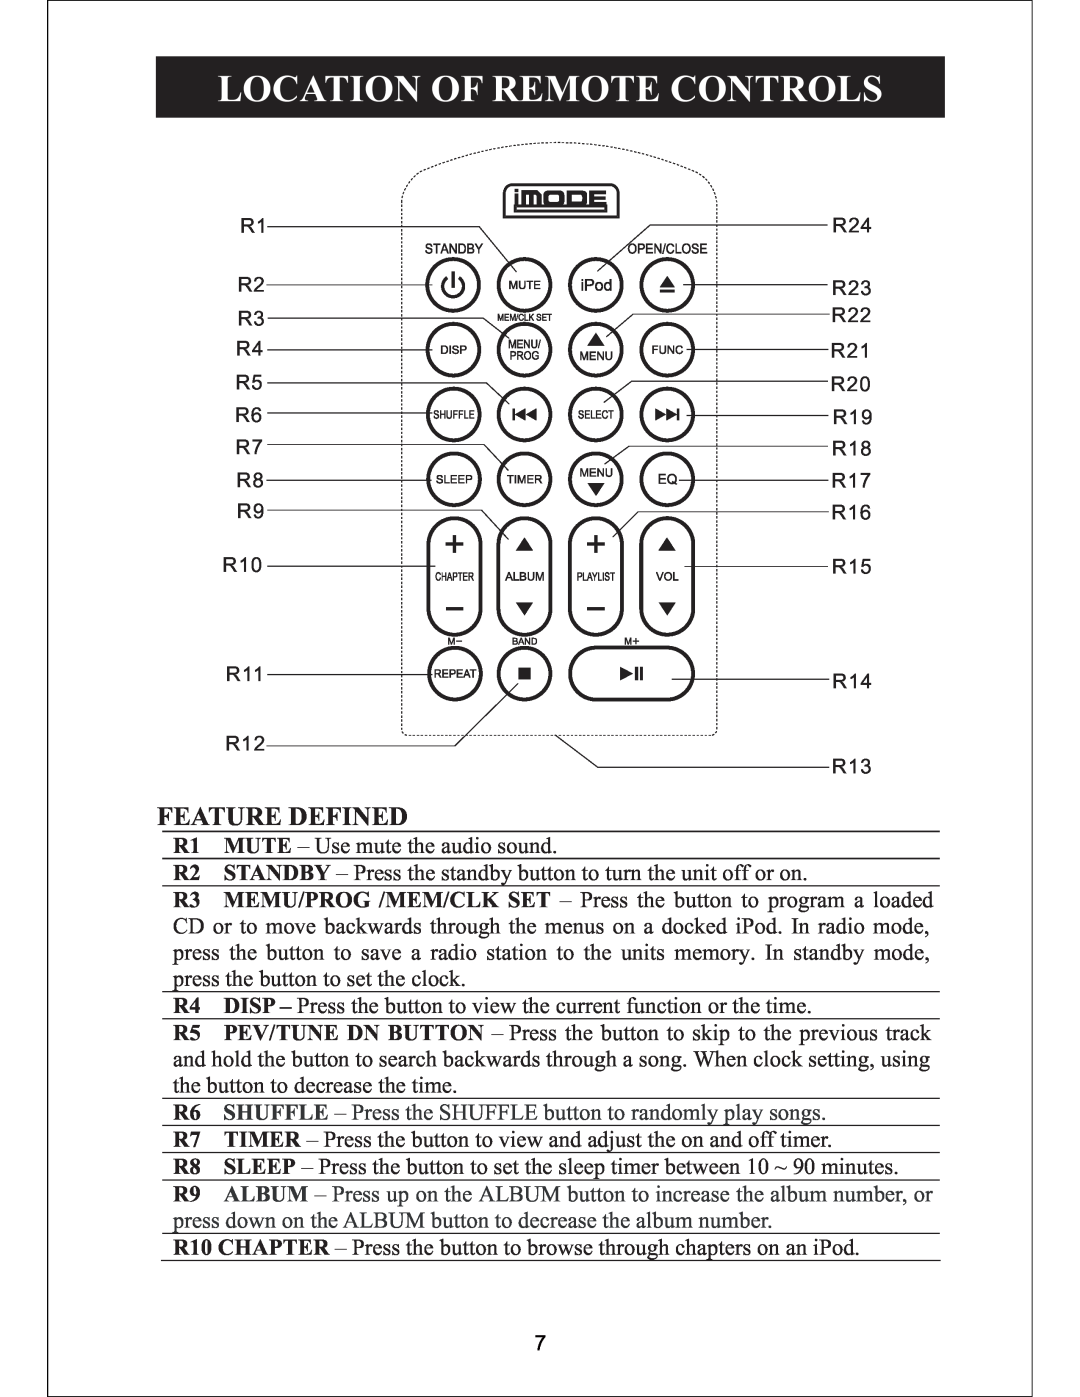 Sylvania SIP3019 instruction manual Location Of Remote Controls, Feature Defined 